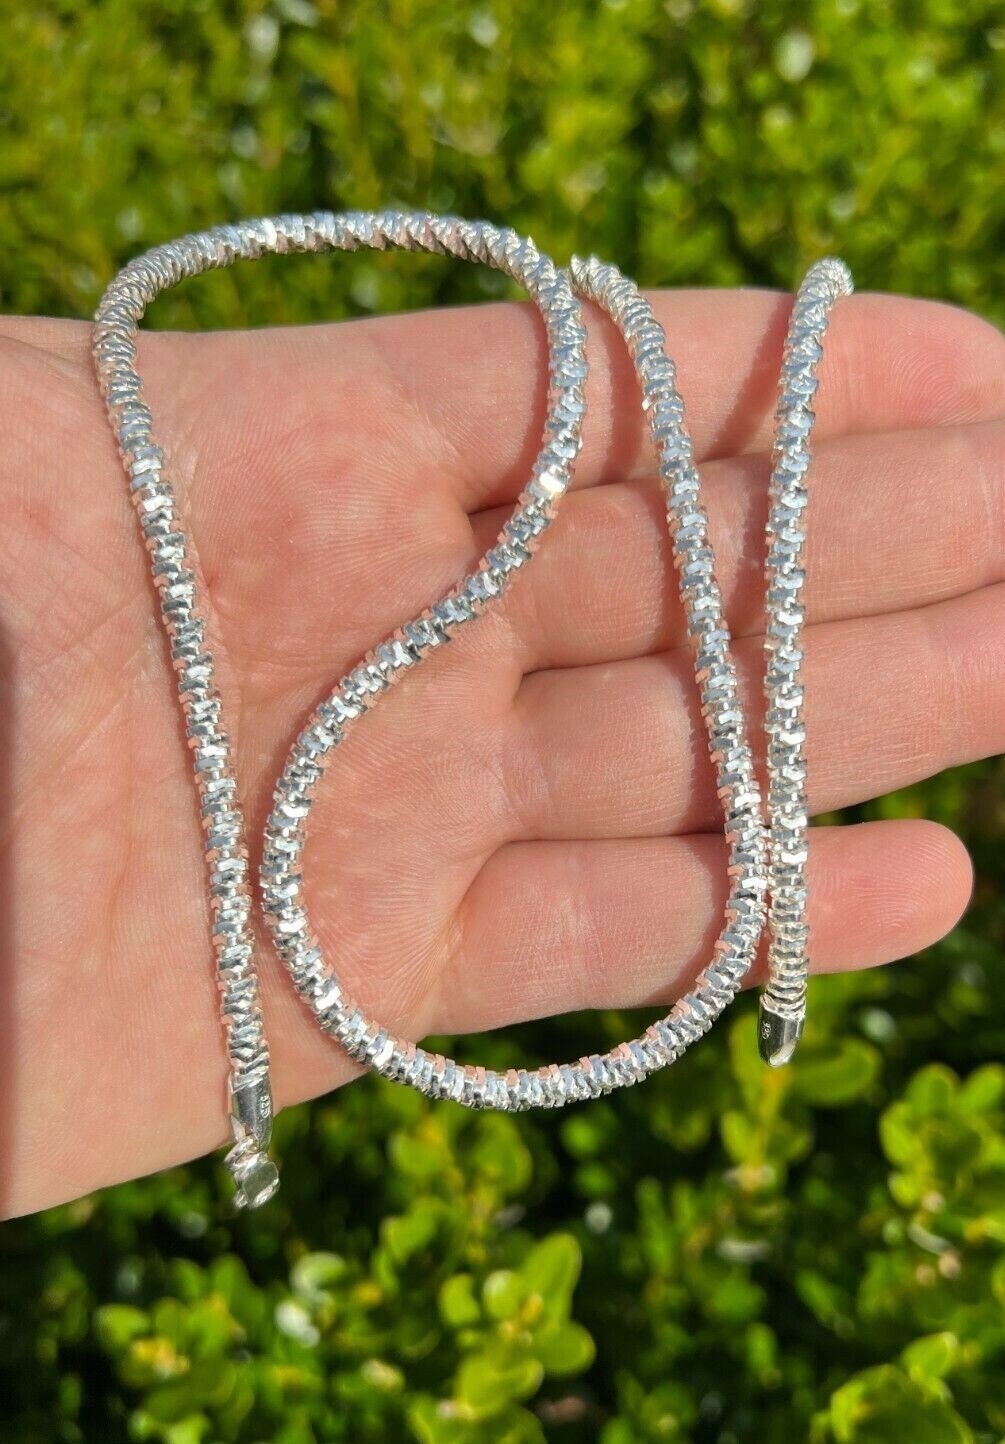 Men's Women's Solid 925 Sterling Silver 4mm Diamond Cut SPARKLE ROPE  NECKLACE Ice Rock Margarita Chain 18 to 30 Lengths -  Canada